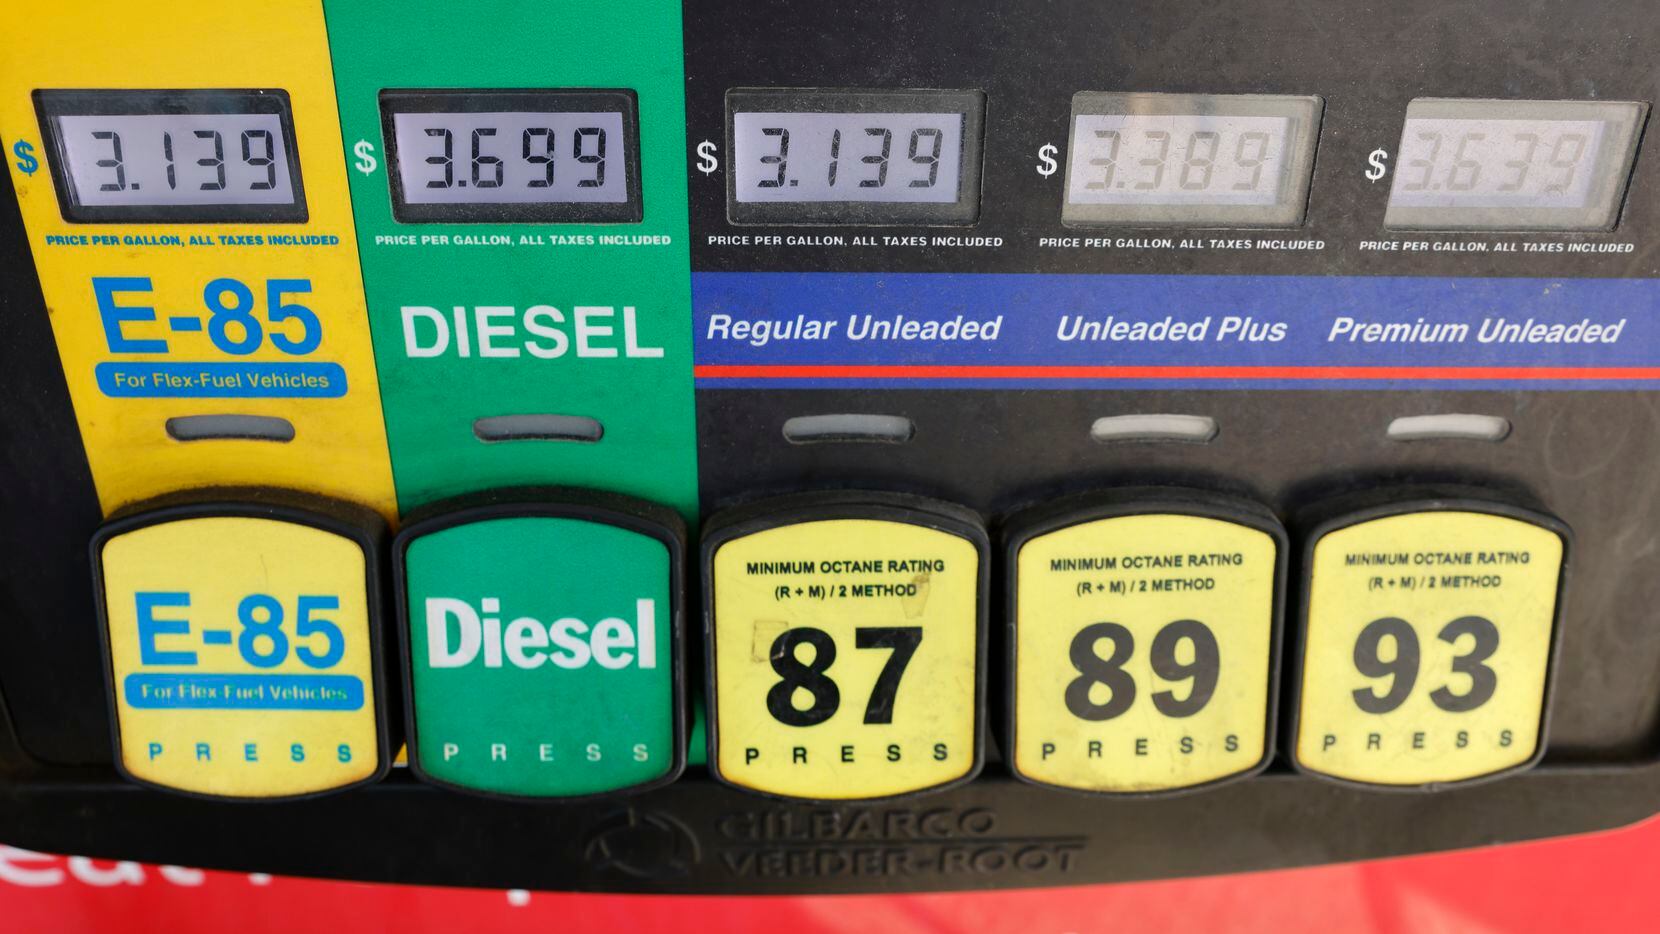 Various fuel prices are displayed at a RaceTrac on Thursday, Feb. 10, 2022 in Frisco, Texas.